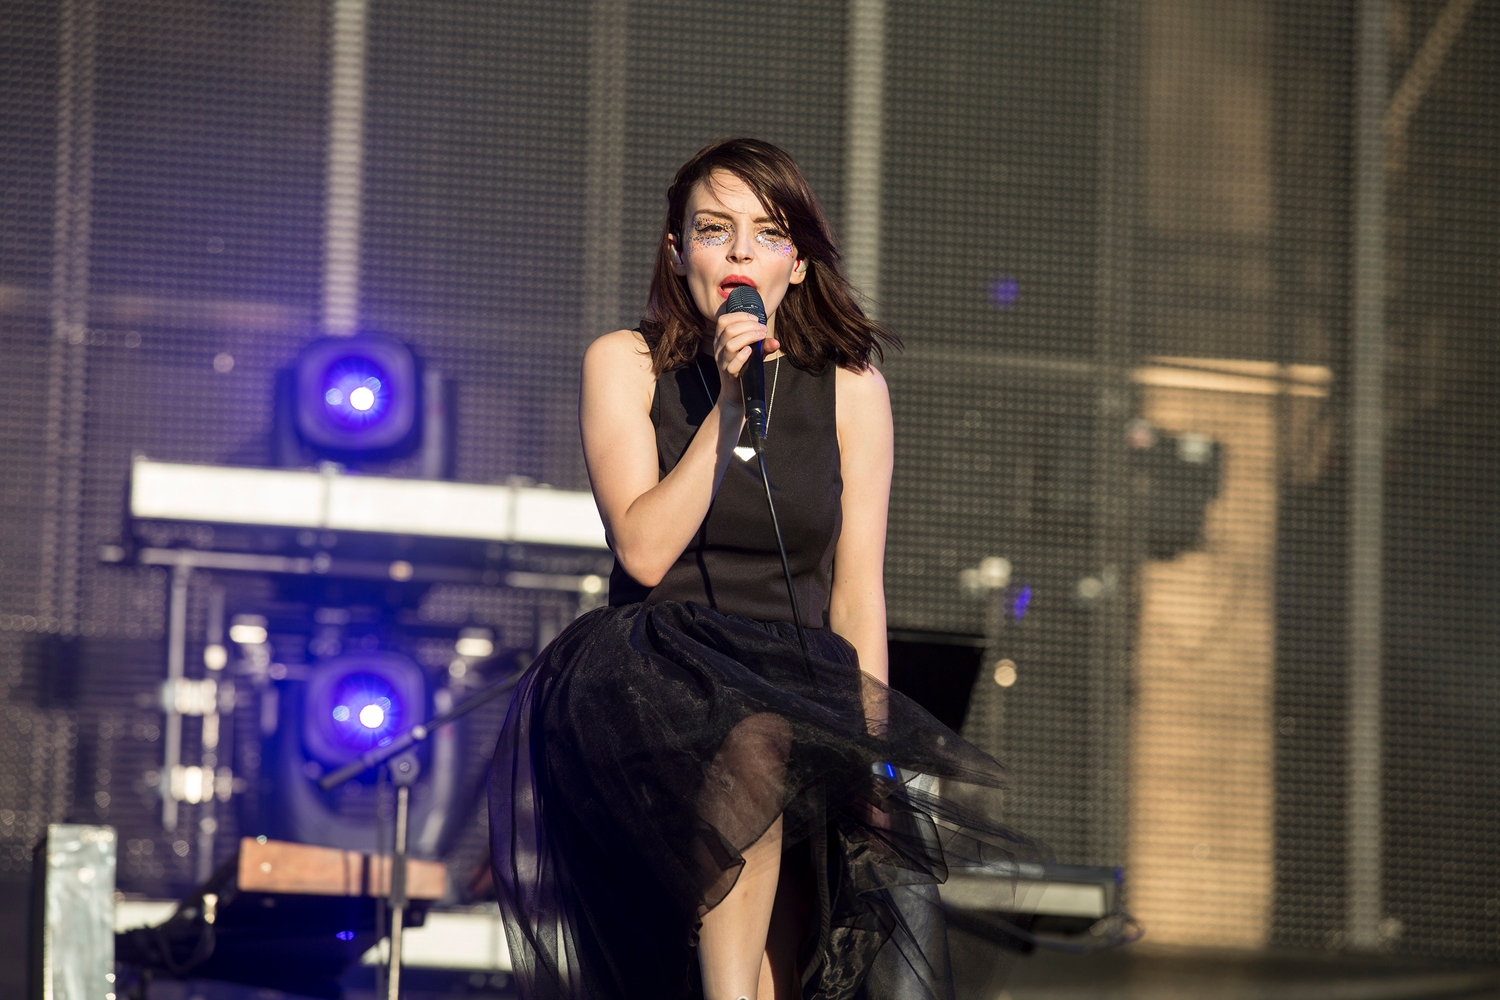 "RIP Harambe" - Chvrches offer thumping Reading 2016 set